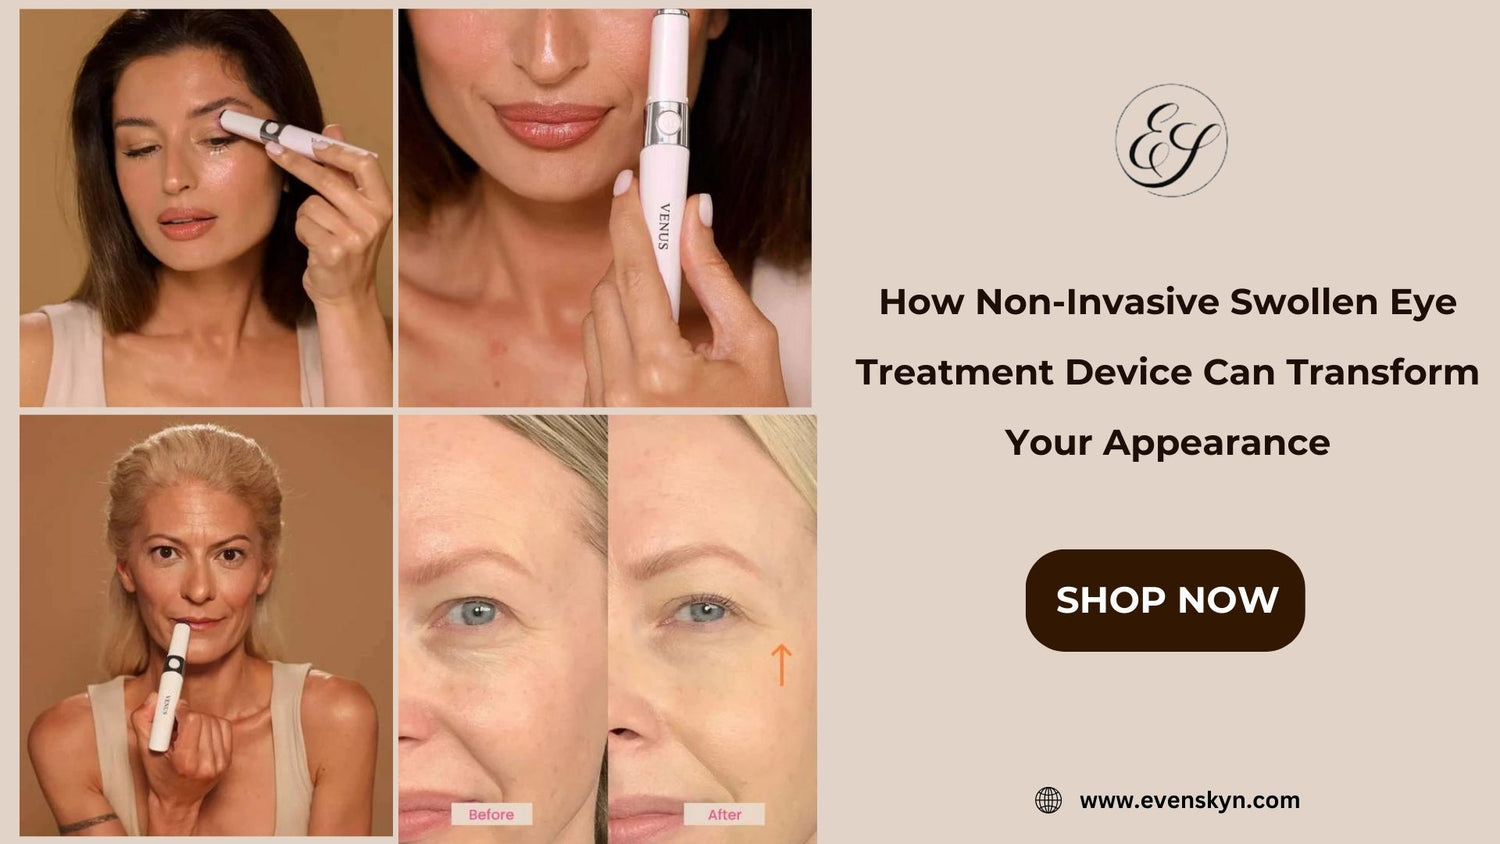 How Non-Invasive Swollen Eye Treatment Device Can Transform Your Appearance